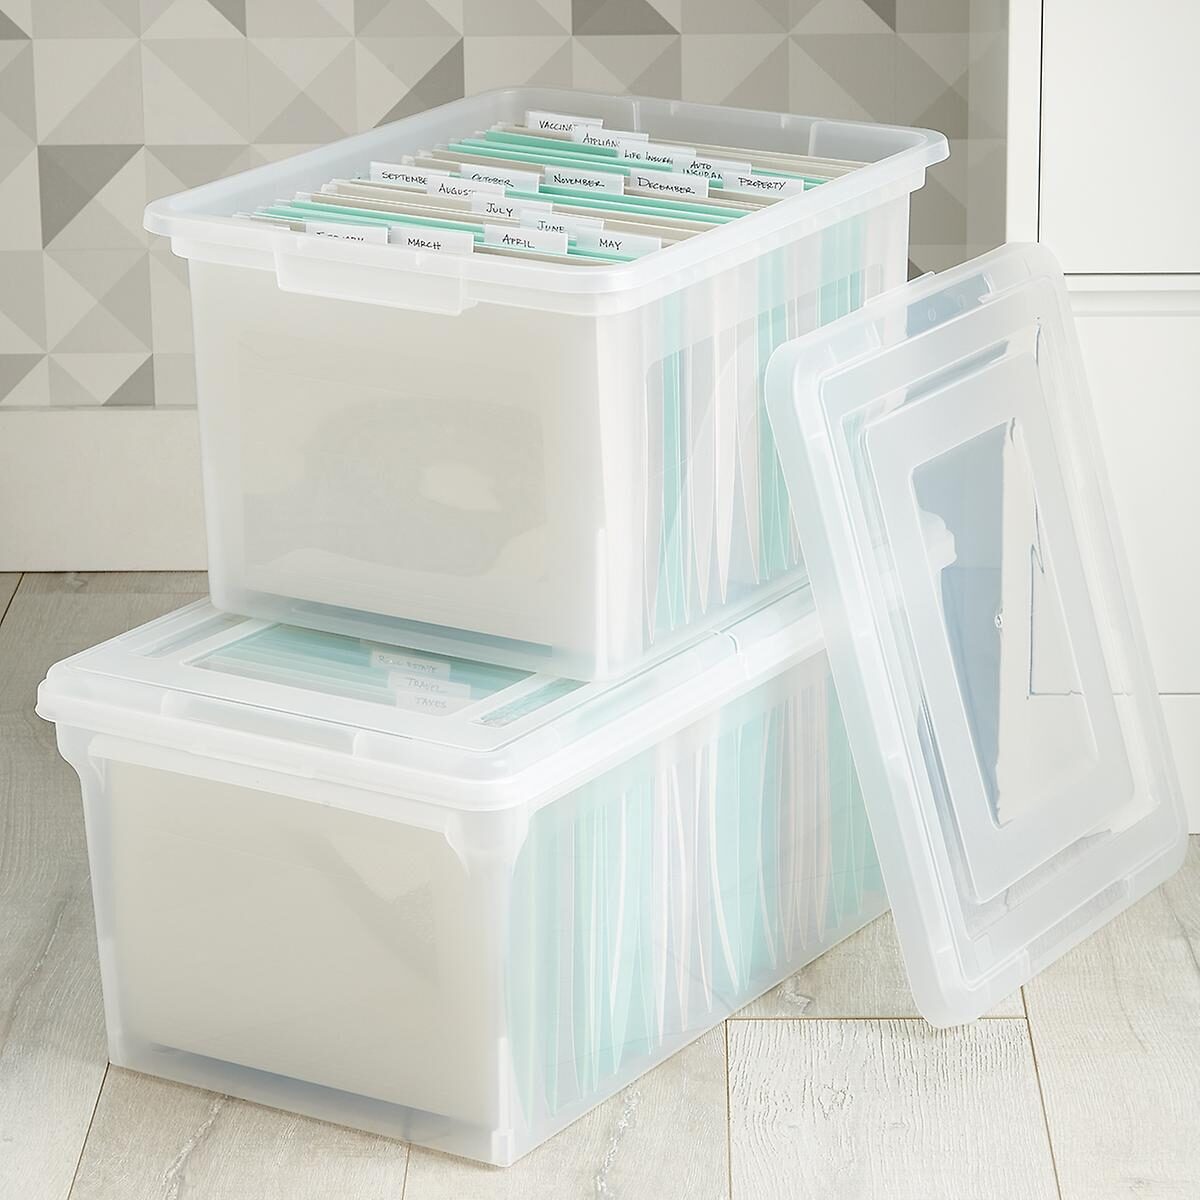 stackable Translucent File Tote Box is ideal for convenient storage and quick transport of important files and documents